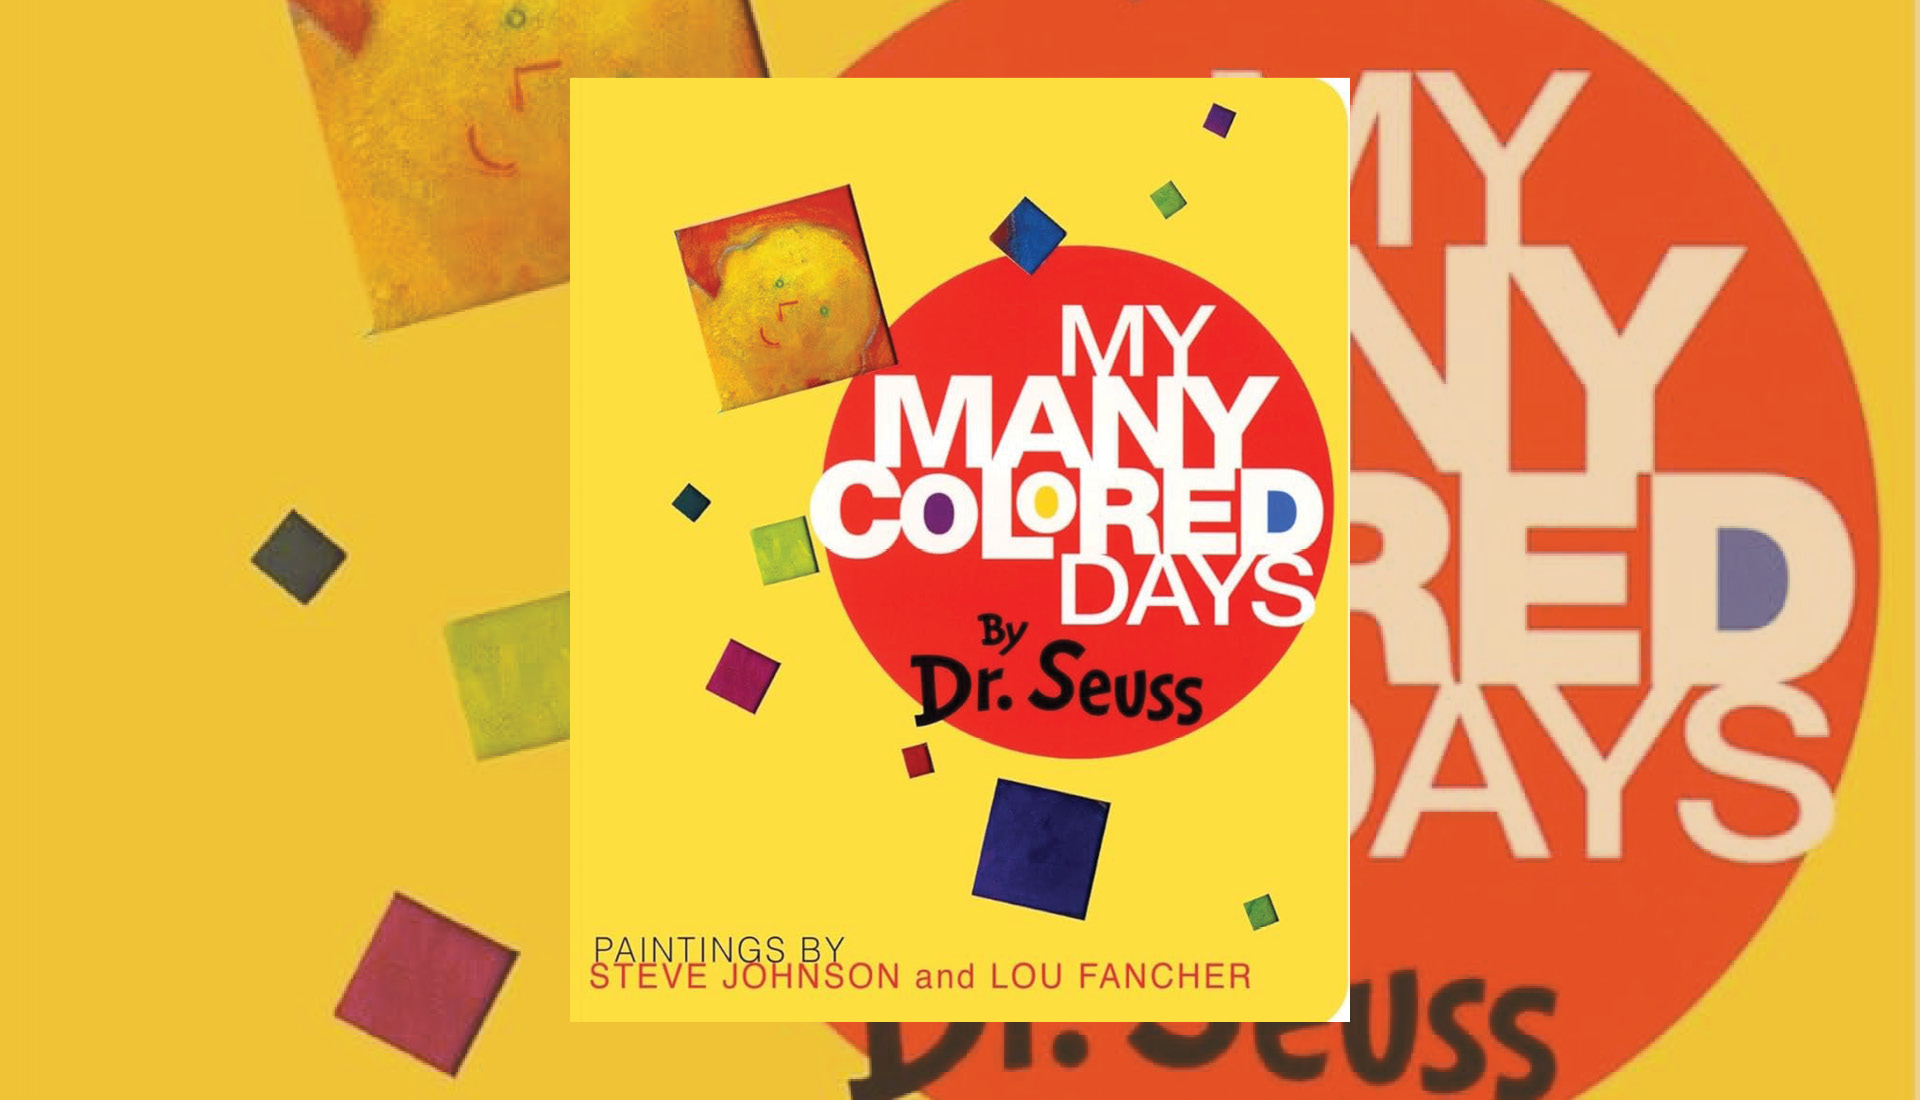 My Colored Days by Dr. Suess